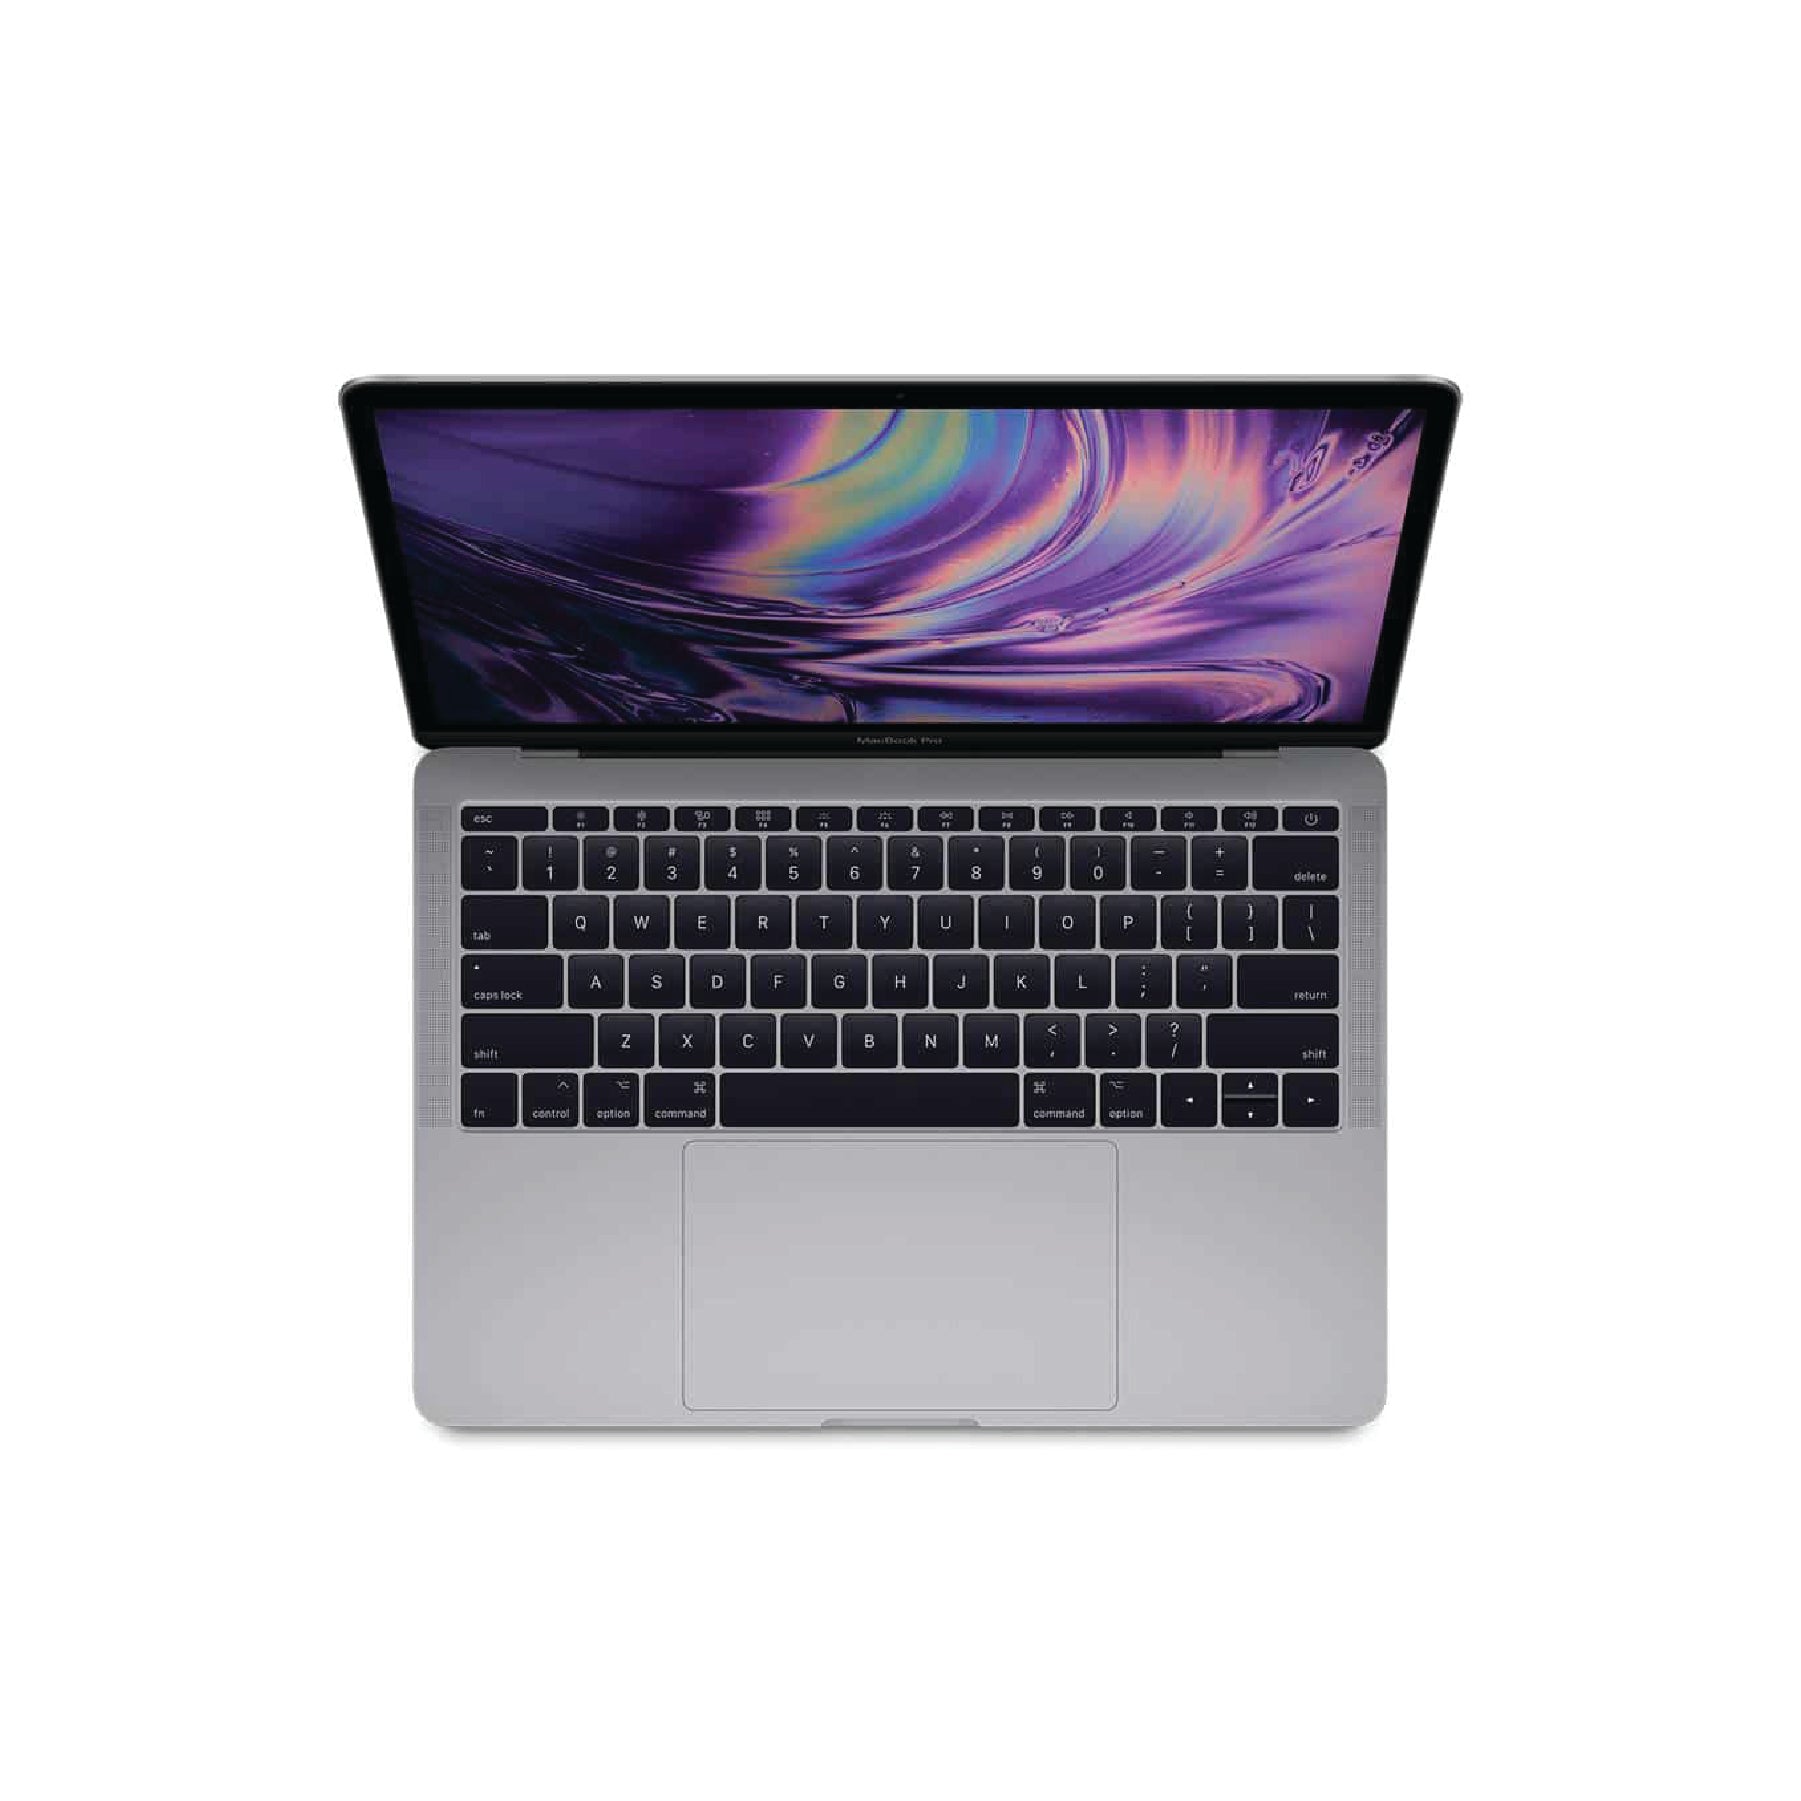 MacBook Pro (13-inch, 2017, Two Thunderbolt 3 ports) 2.3GHz, Intel Core i5, 256GB - Space Grey (Better)